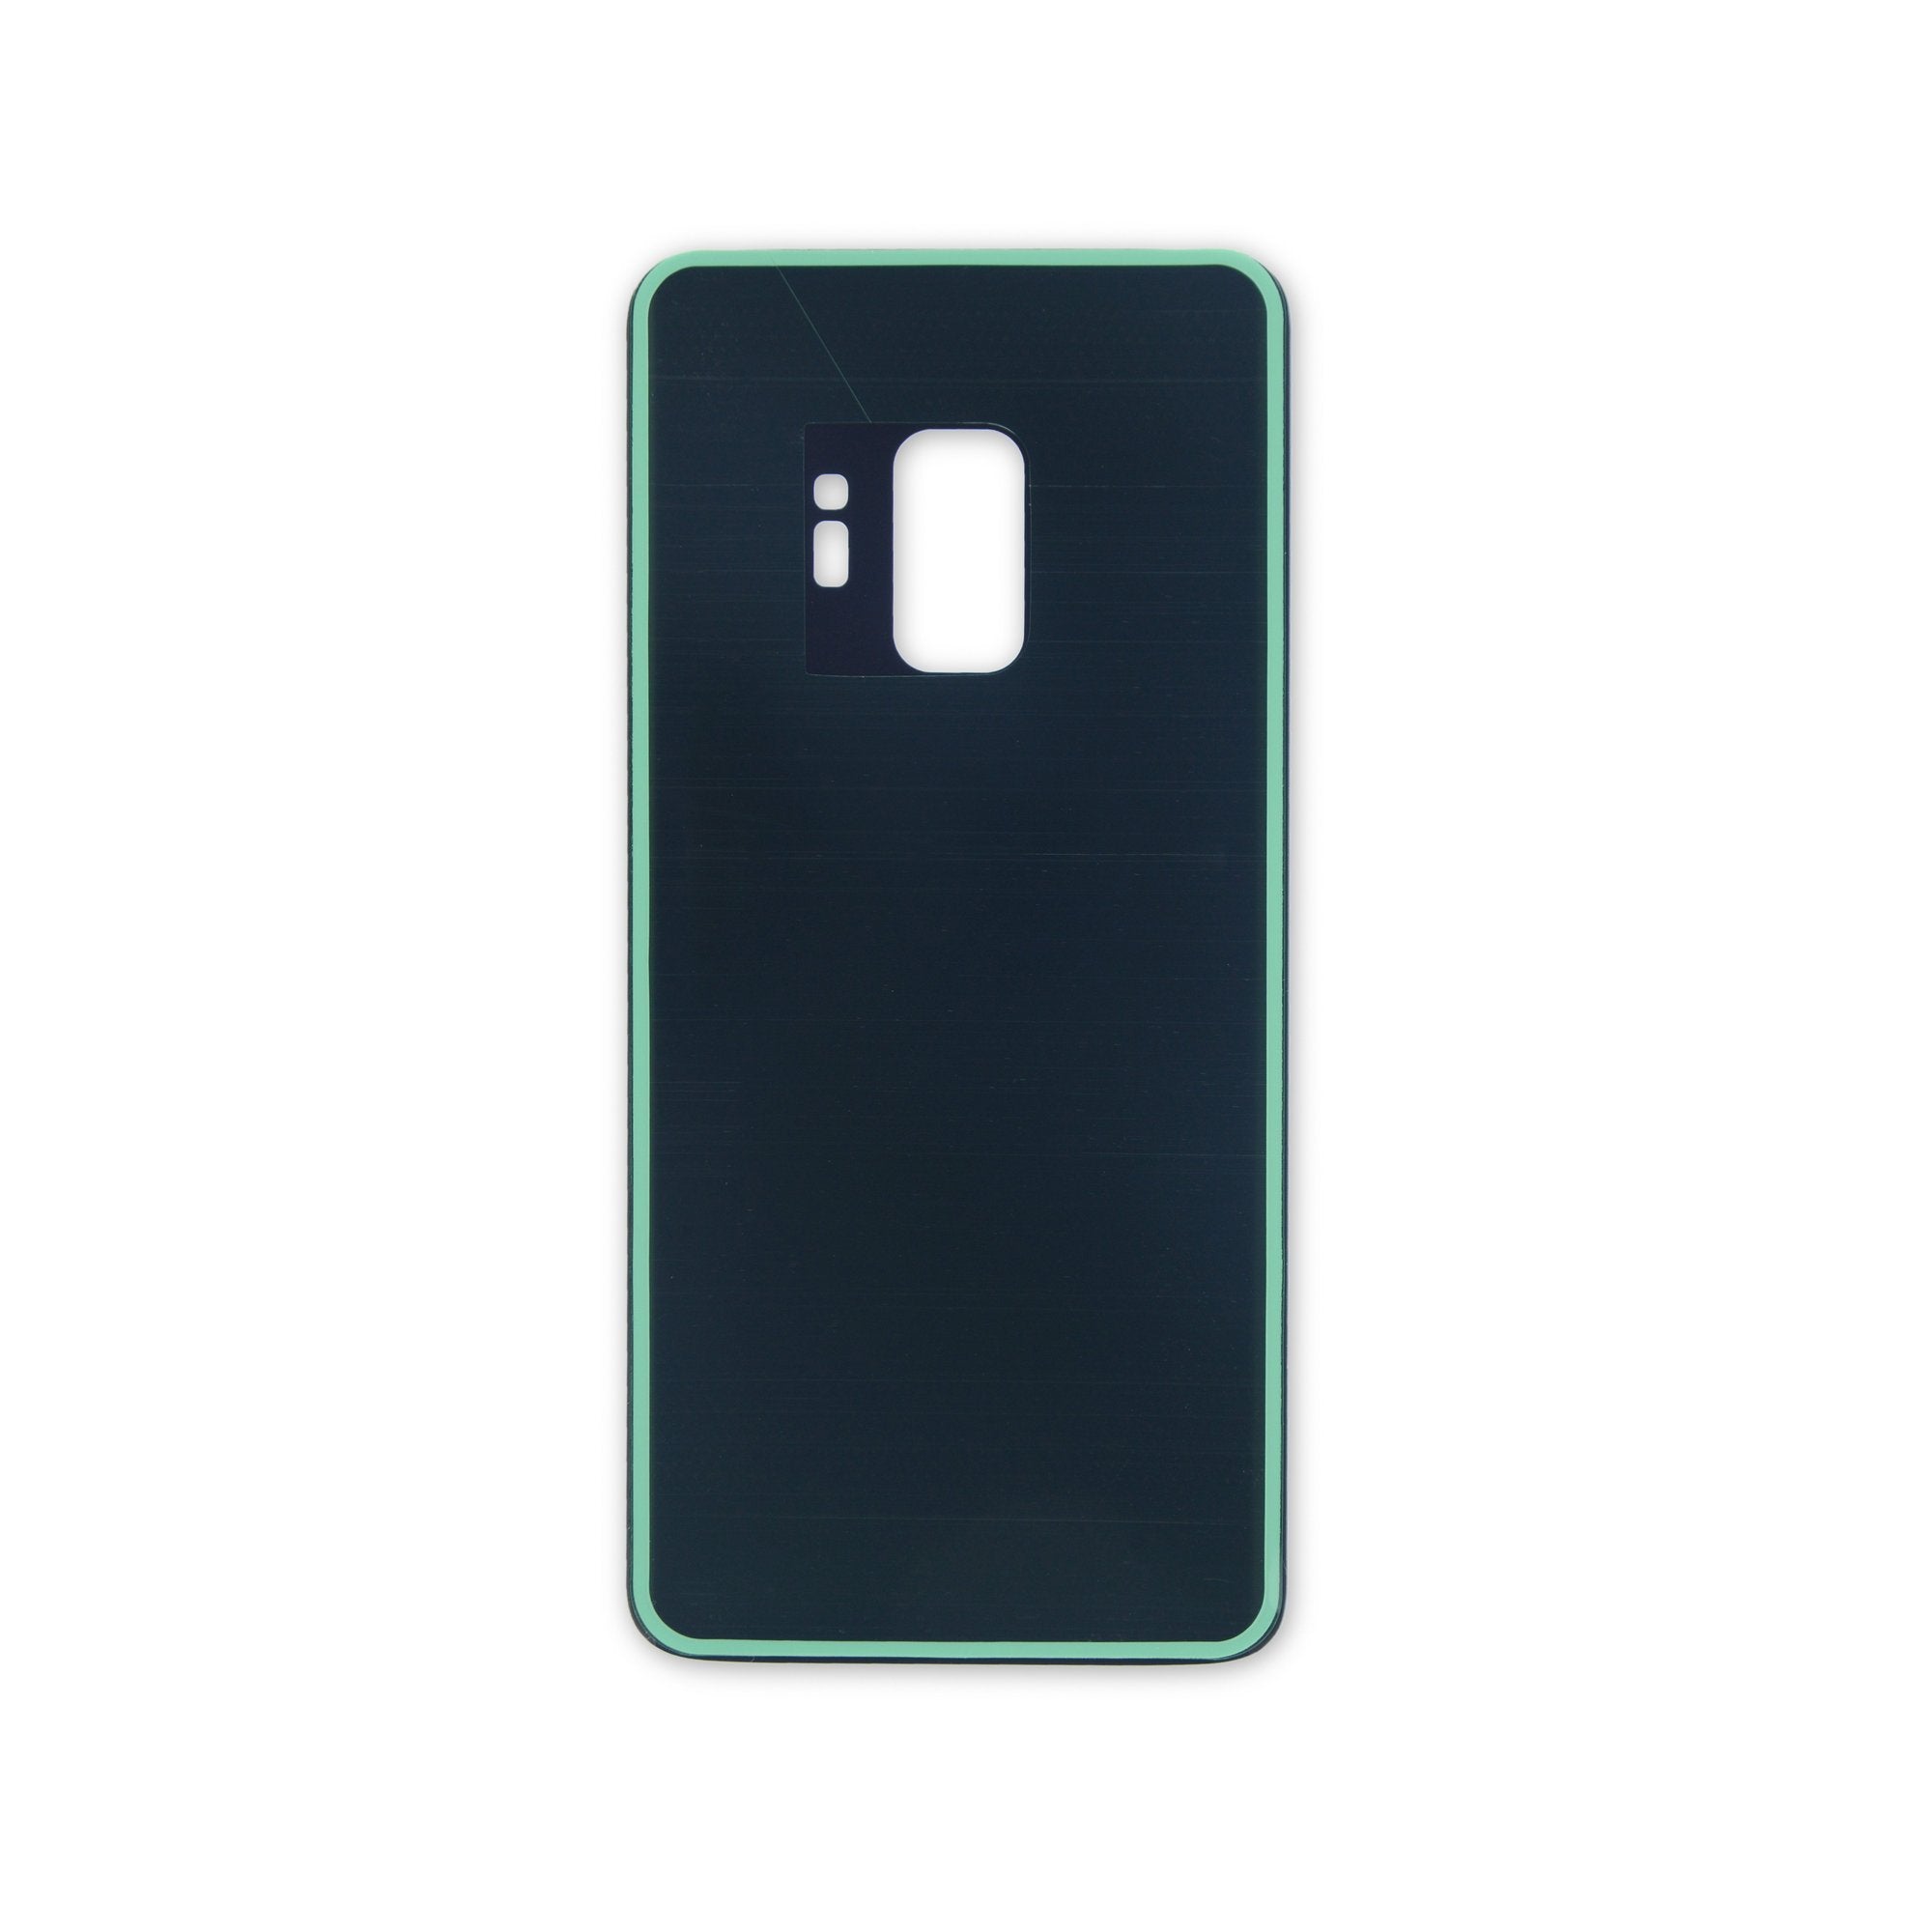 Galaxy S9 Rear Glass Panel/Cover Black New